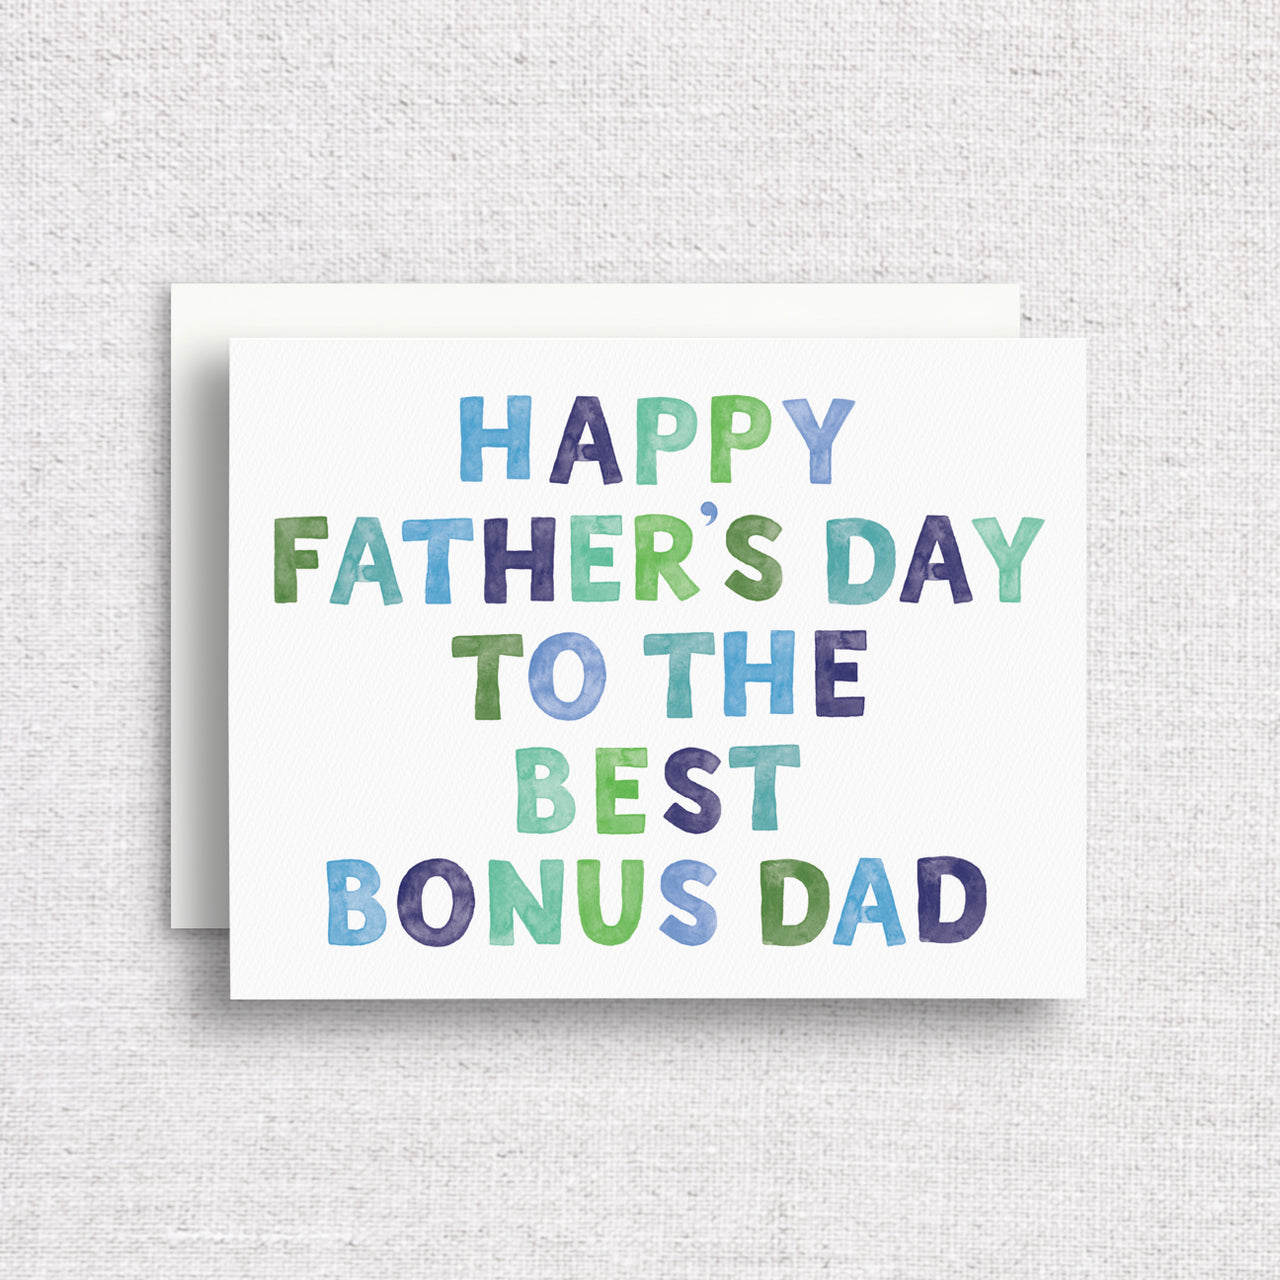 Happy Father's Day to the best Bonus Dad by Gert & Co